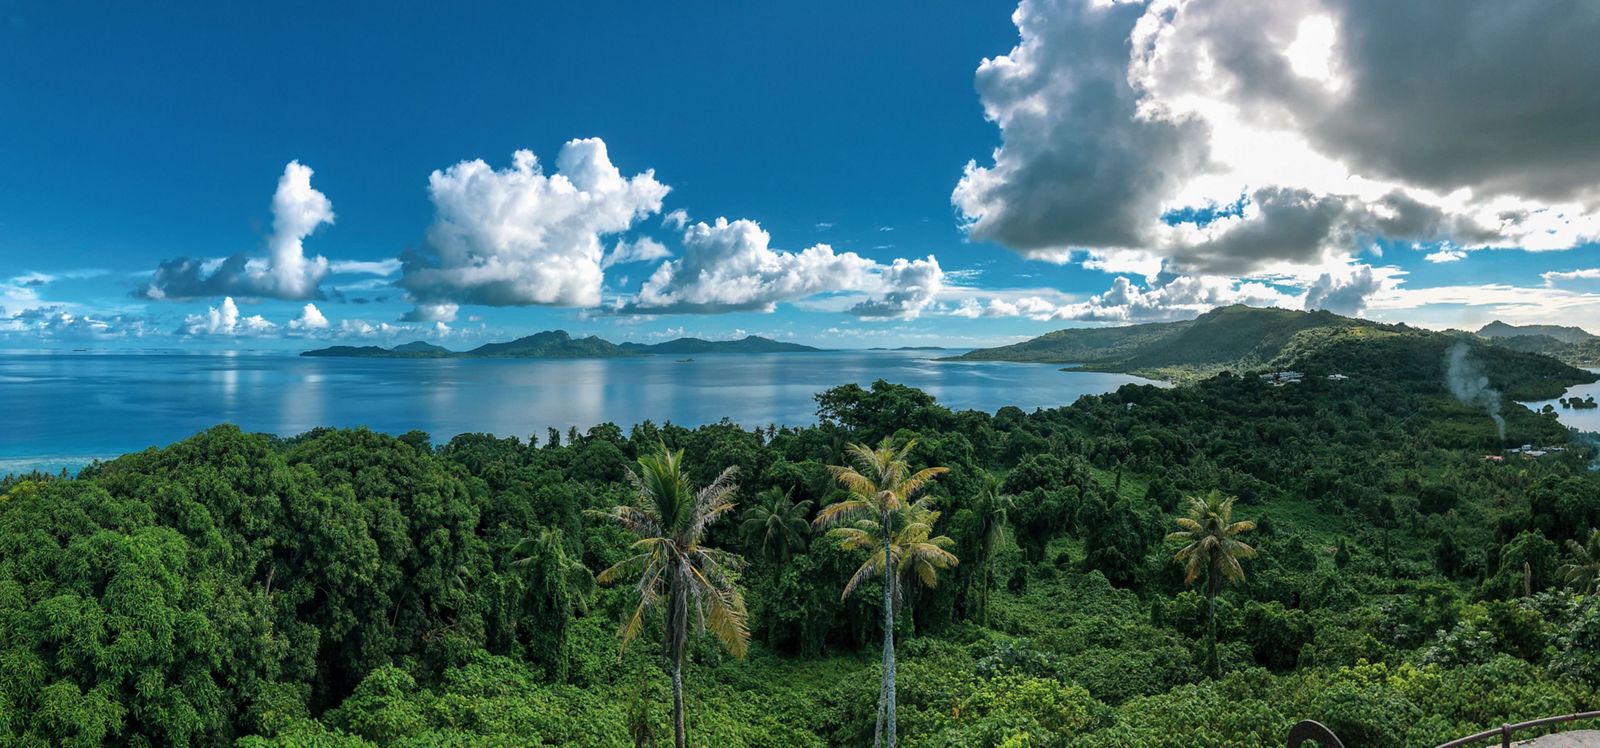 expansive view of green islands rising up out of blue ocean with palm trees in foreground